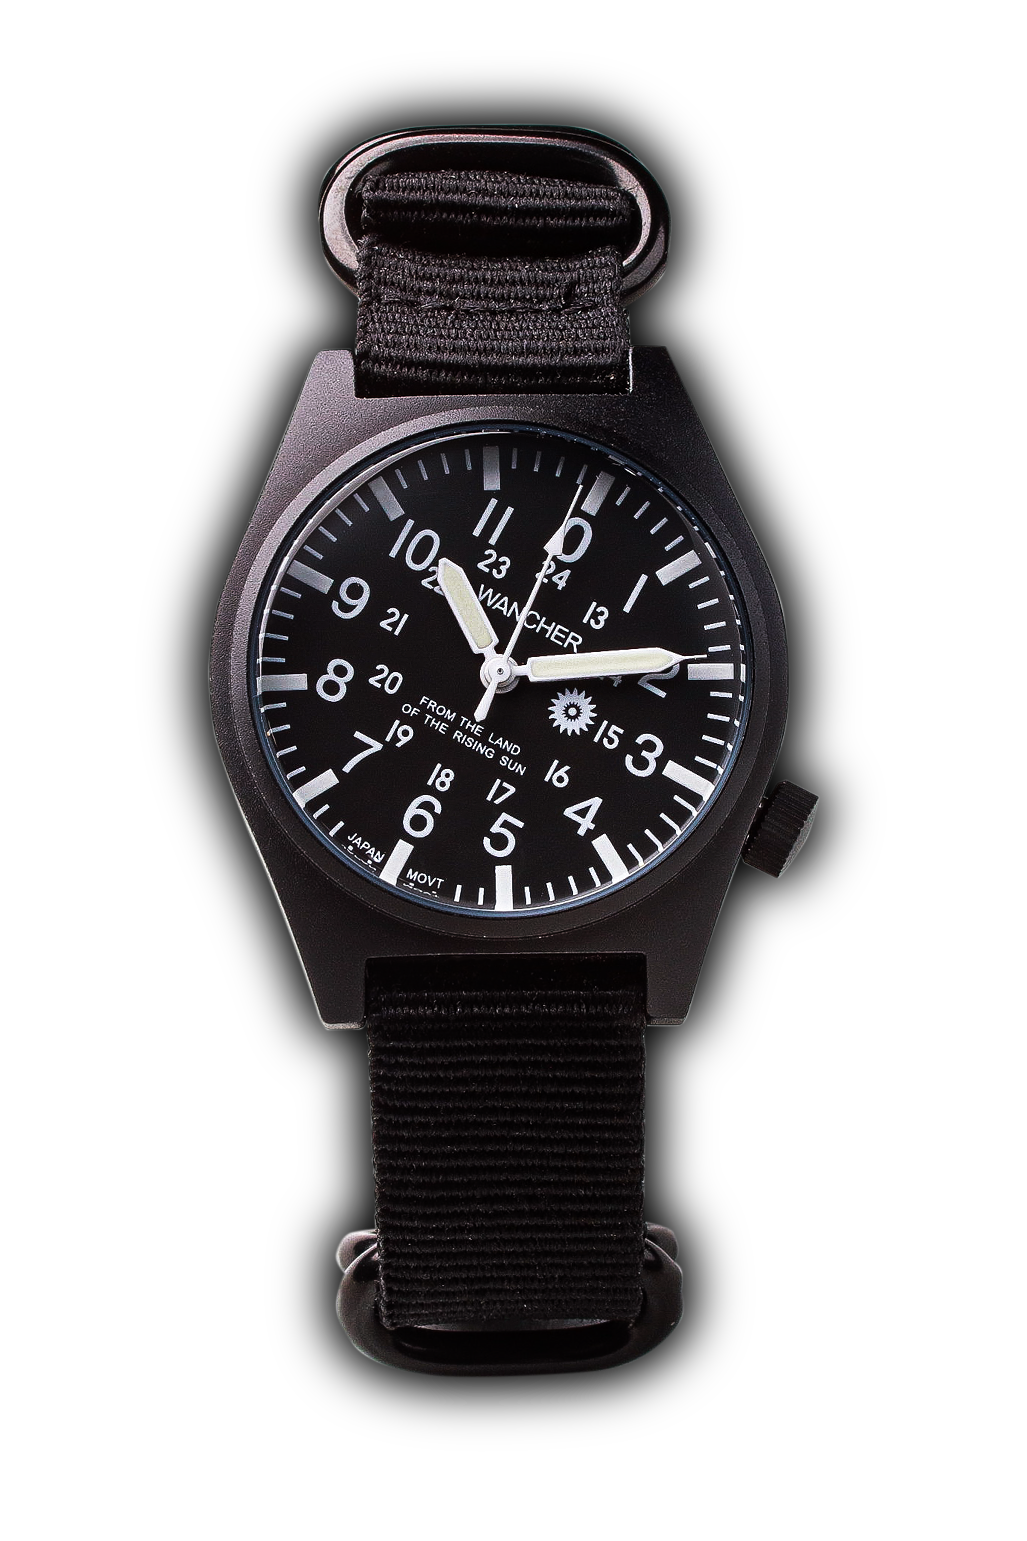 Gurkha Black Dial White 0 - Wancher Watch Wancher Watch Black Wancher Watch Gurkha Black Dial White 0 {{ Automatic Watch {{ Watch }} }} {{ Japan }} Adventure-ready Wancher Gurkha Black Dial White 0 Watch with 30-degree inclined watch face, Superluminova on hands and indexes, and double 12-hour and 24-hour display. Resistant to shocks and abrasion, powered by Quartz Movement.